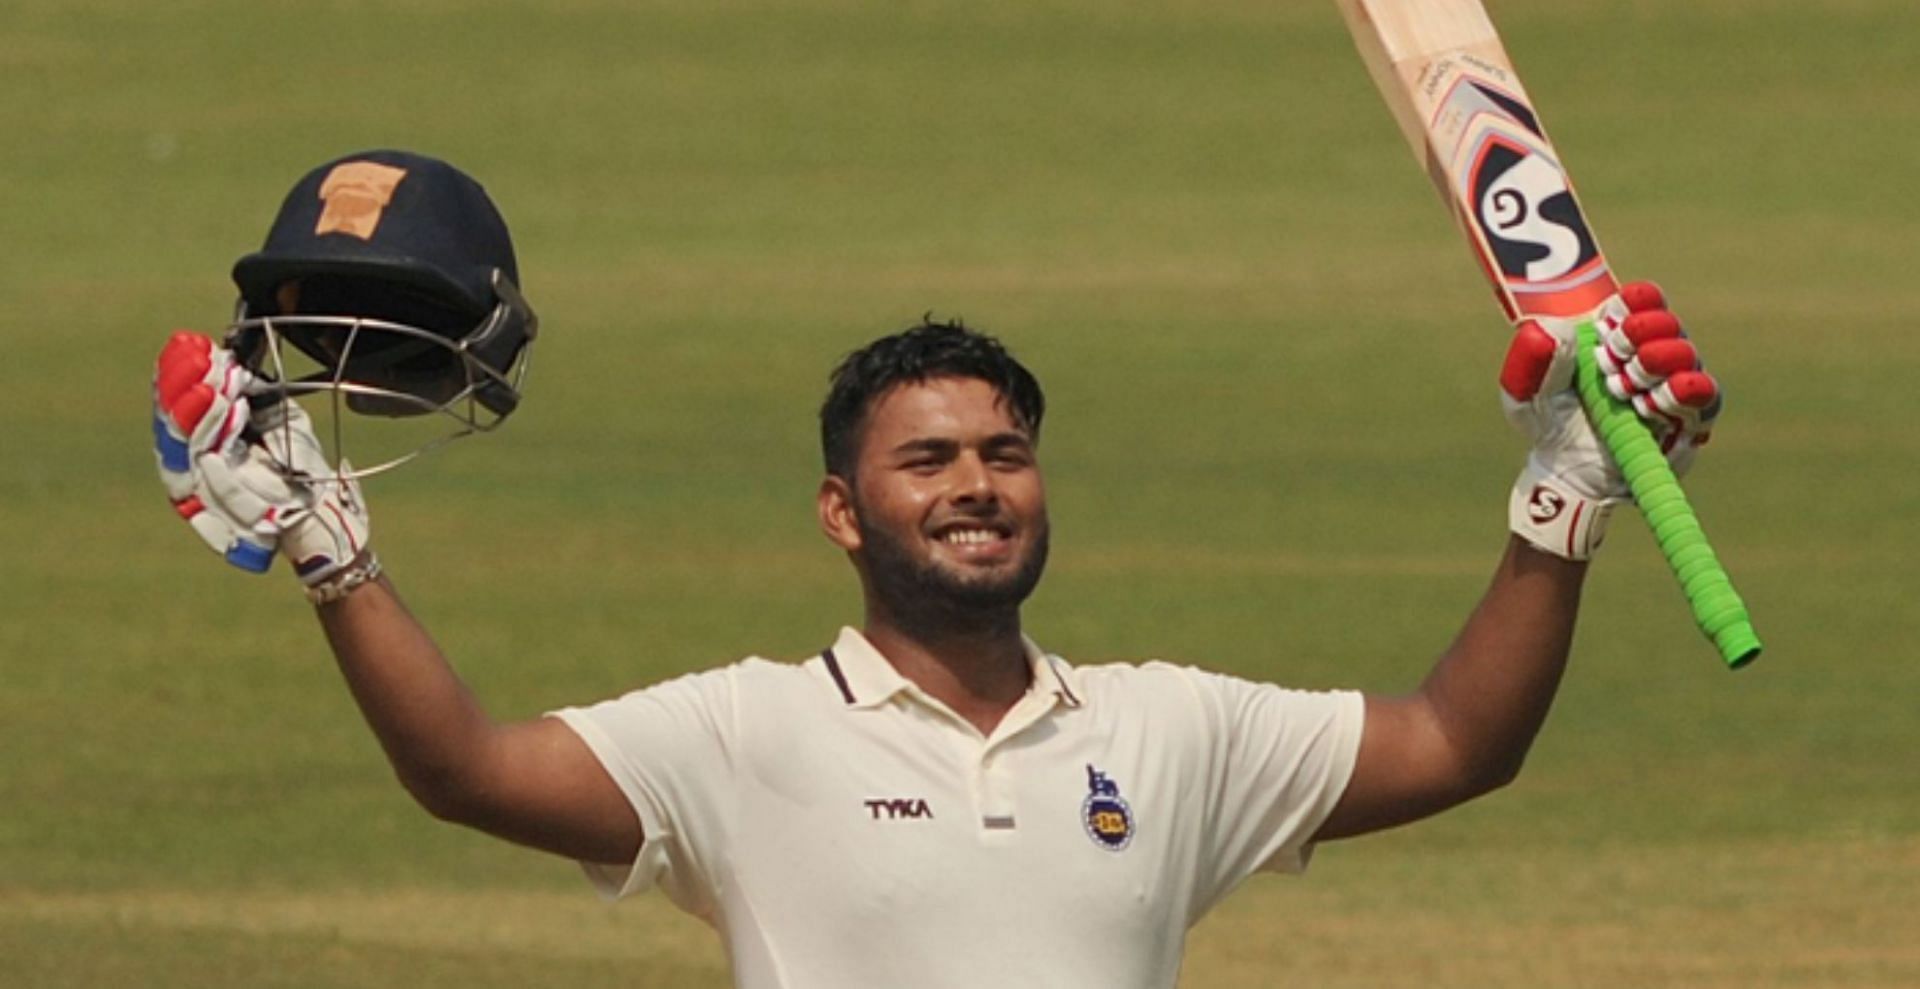 Rishabh Pant also has a first-class triple hundred to his name. Pic: Twitter